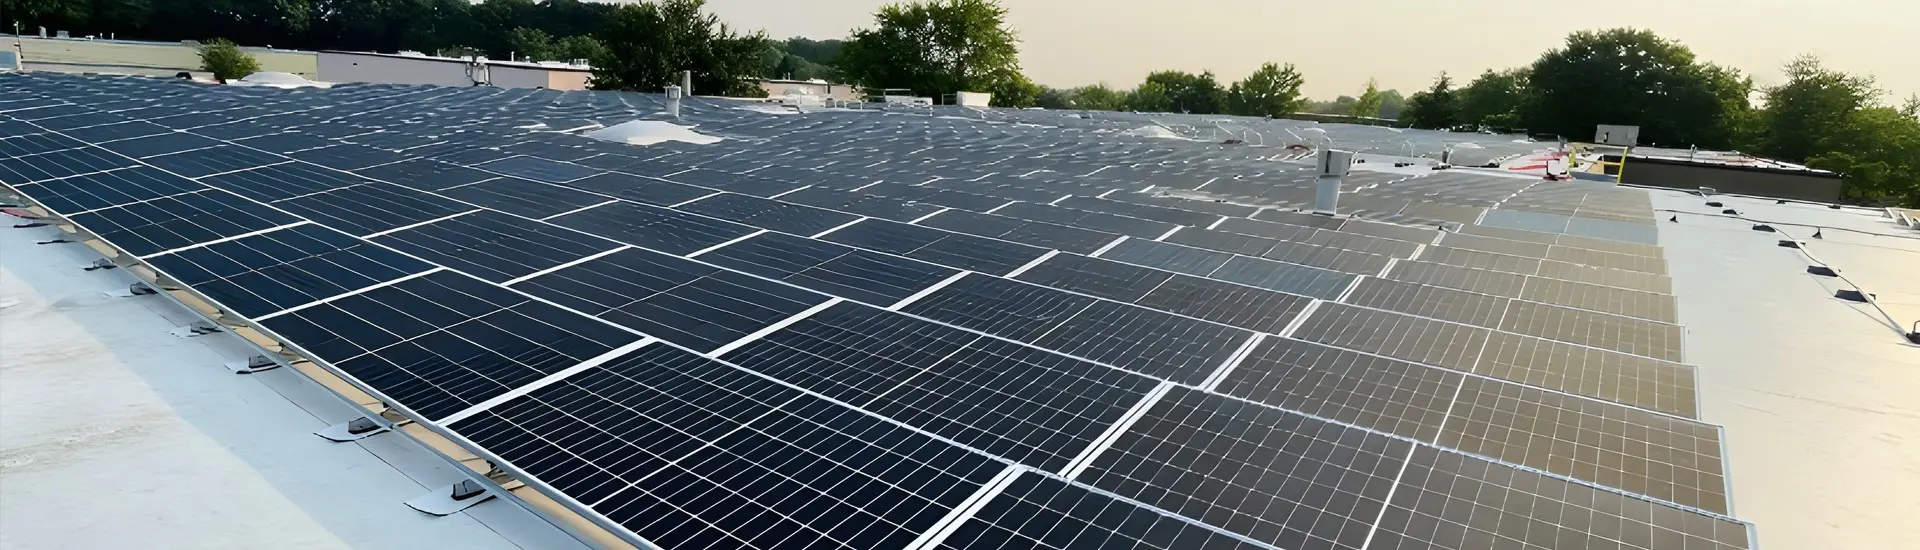 commercial solar panel installation henry county - What is the solar ordinance in Henry County